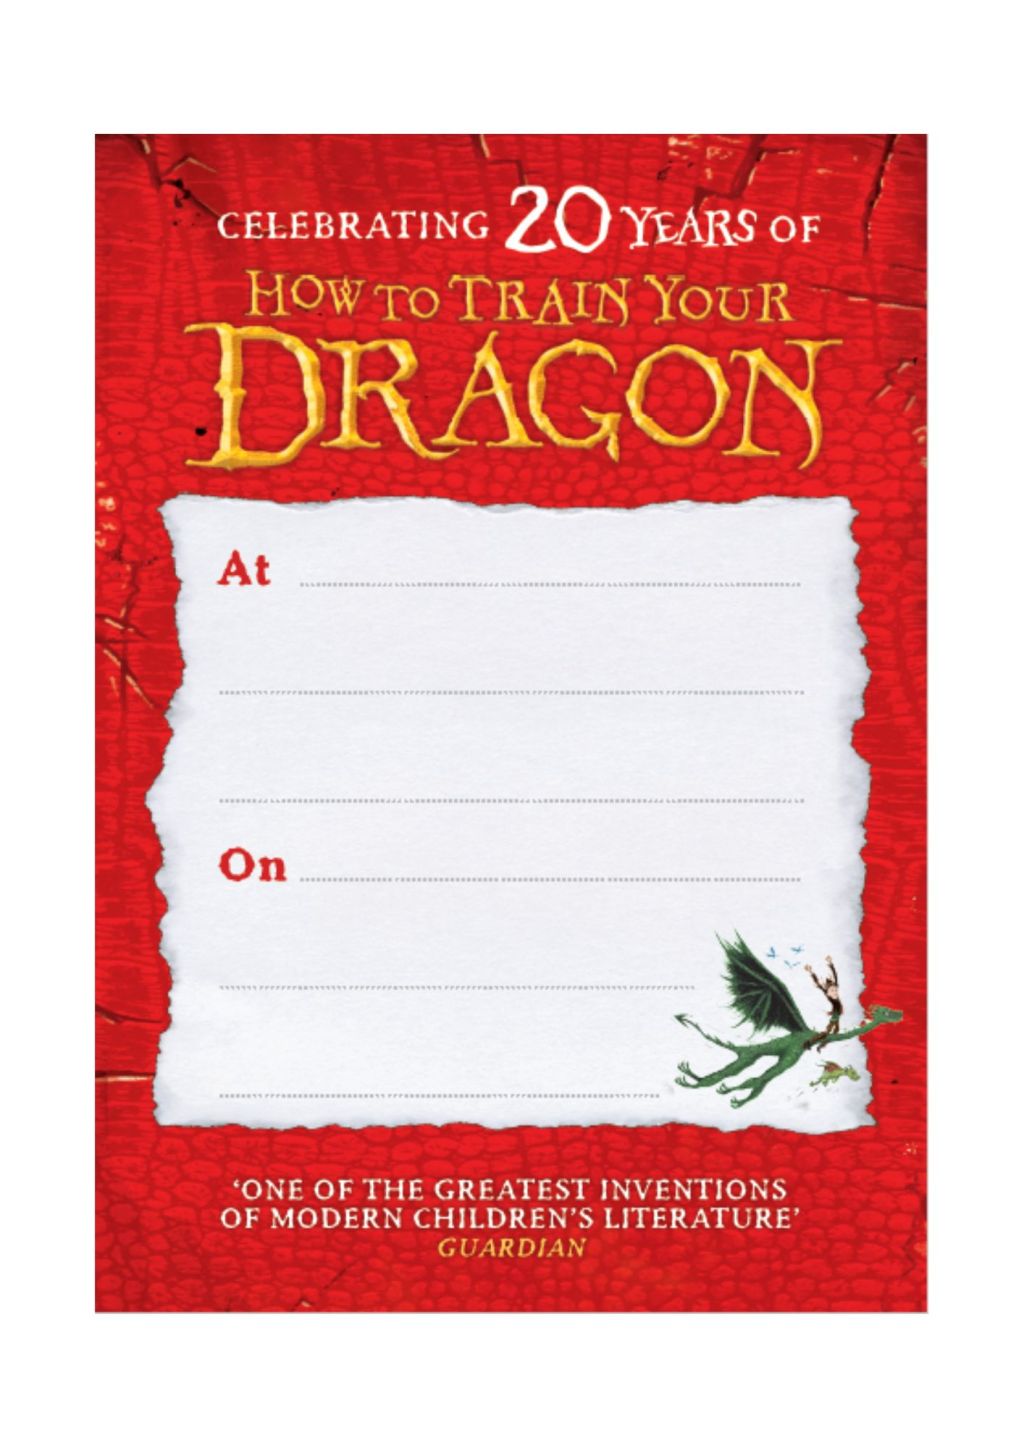 How to Train Your Dragon anniversary event poster